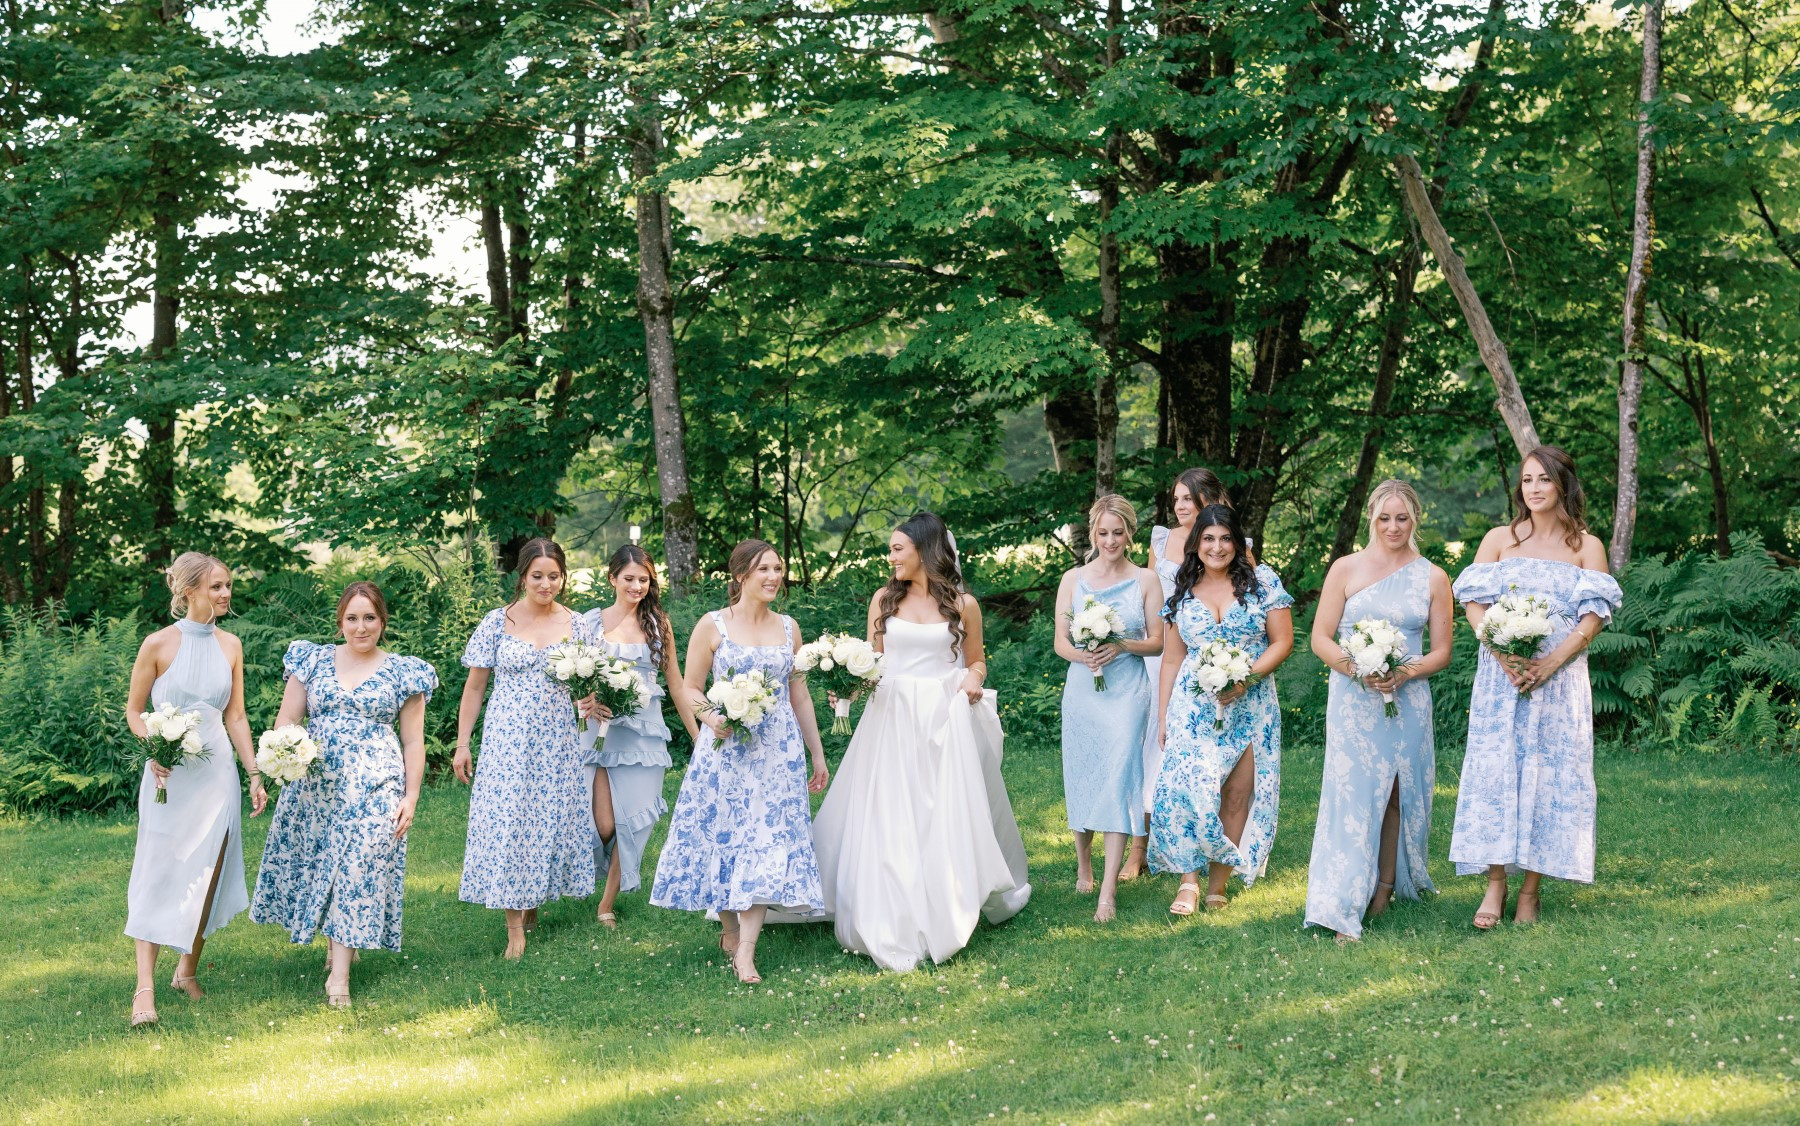 bride walking with bridesmaids in blue dresses towards camera.